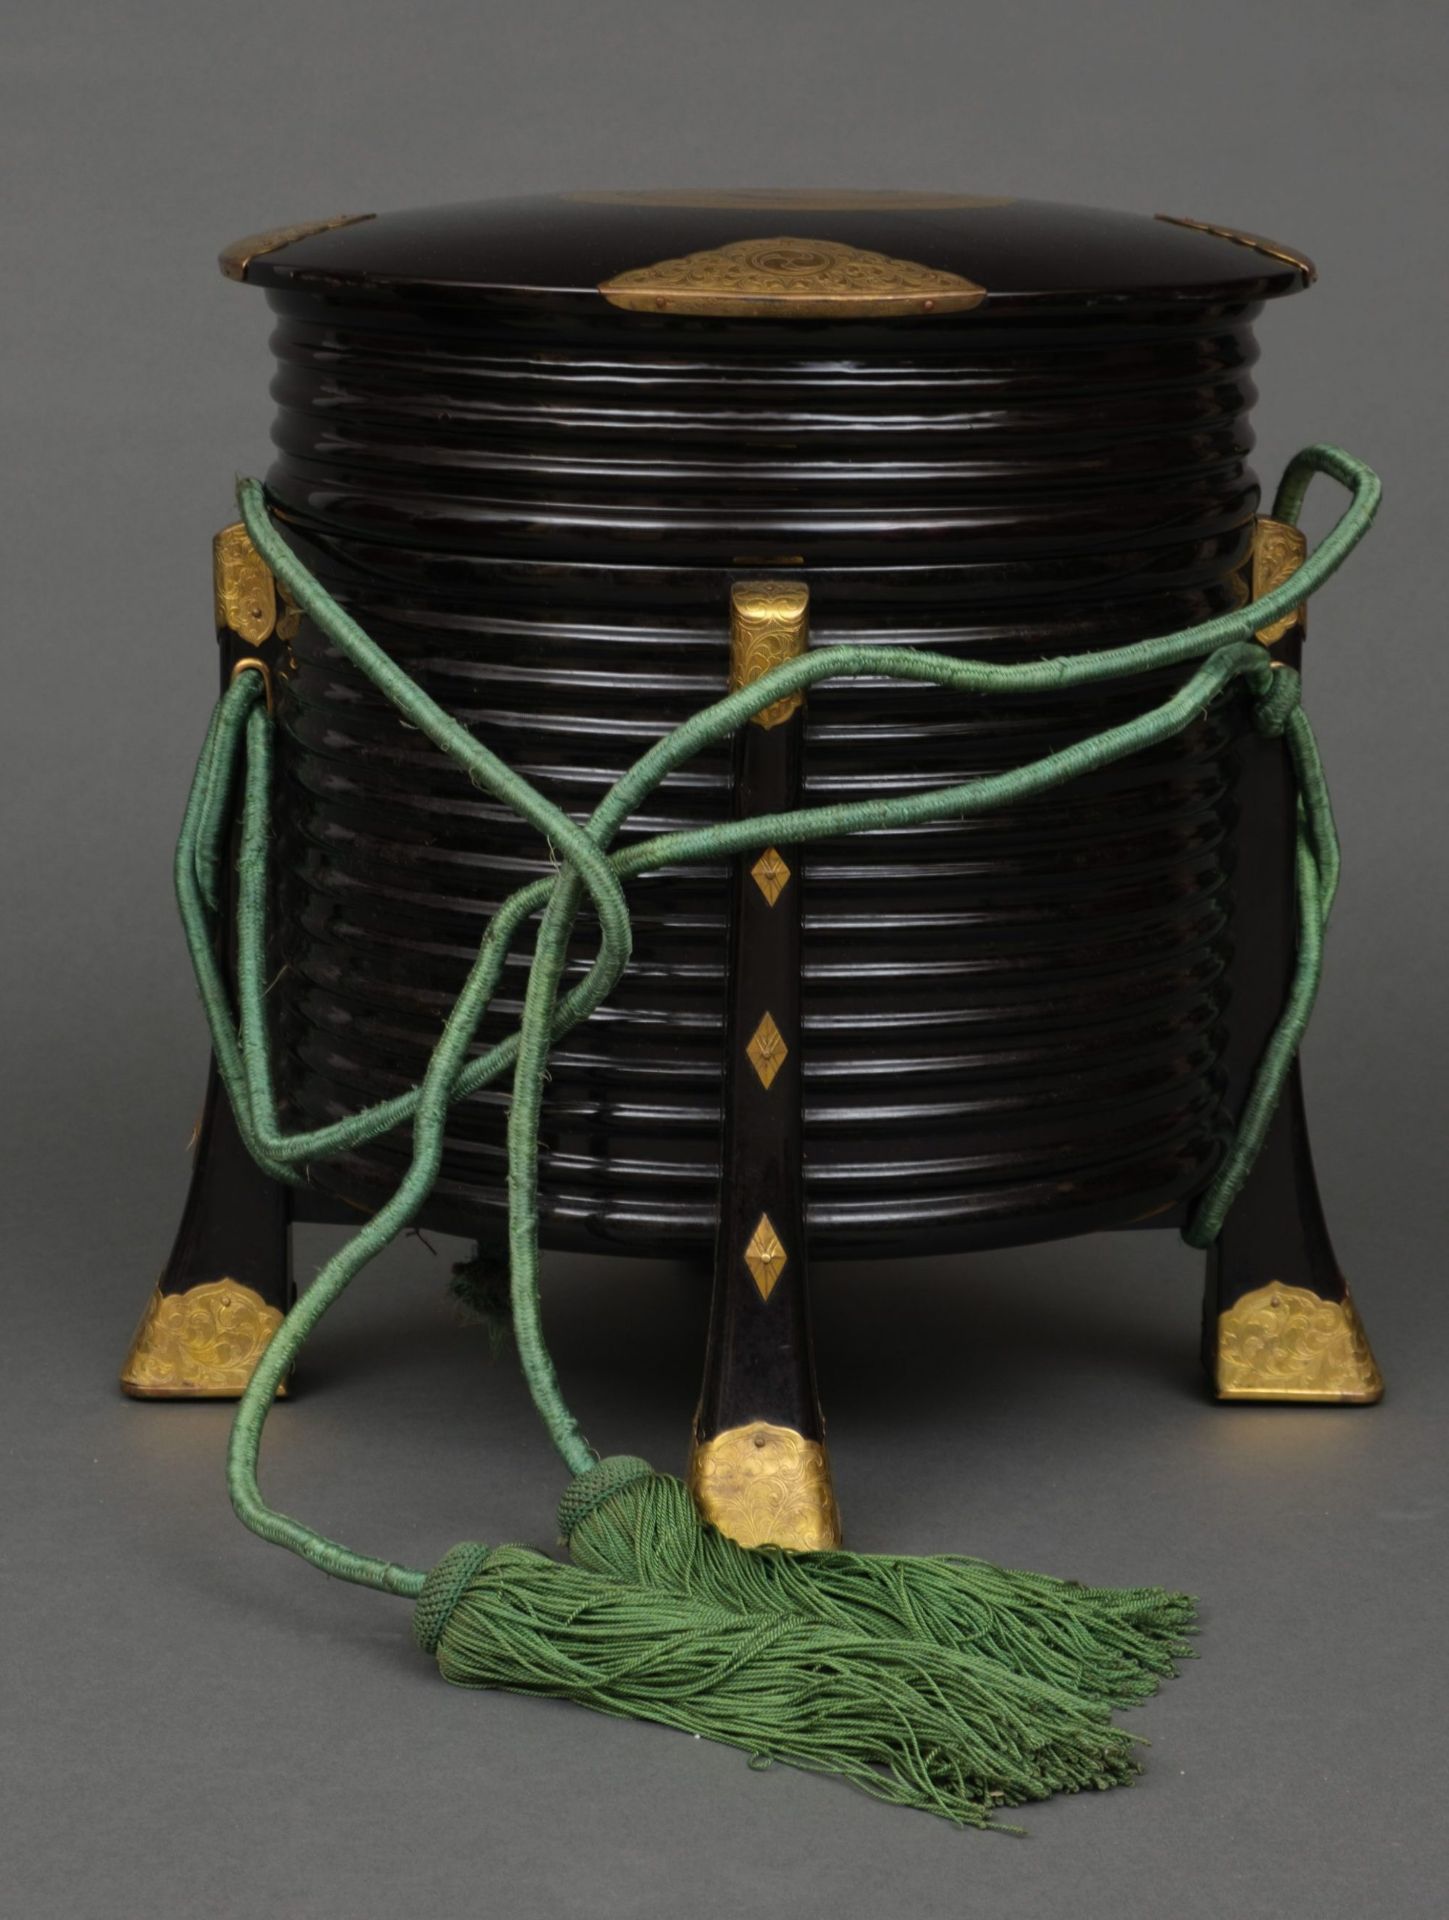 A PAIR OF JAPANESE BLACK LACQUERED WOODEN STORAGE CONTAINERS, FIRST HALF 19TH CENTURY (LATE EDO PERI - Bild 4 aus 5